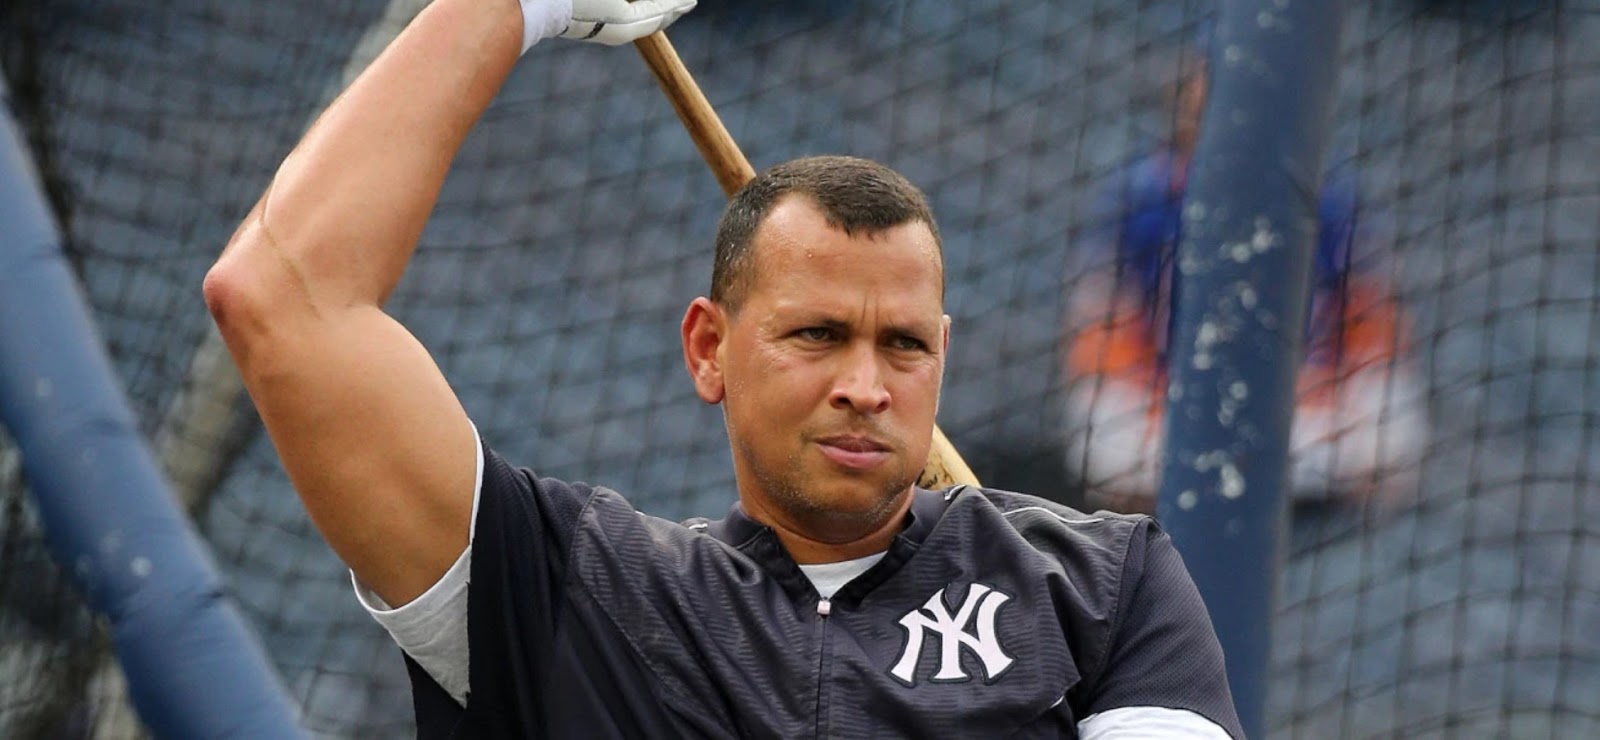 Alex Rodriguez Annuall payscale at Yankees 